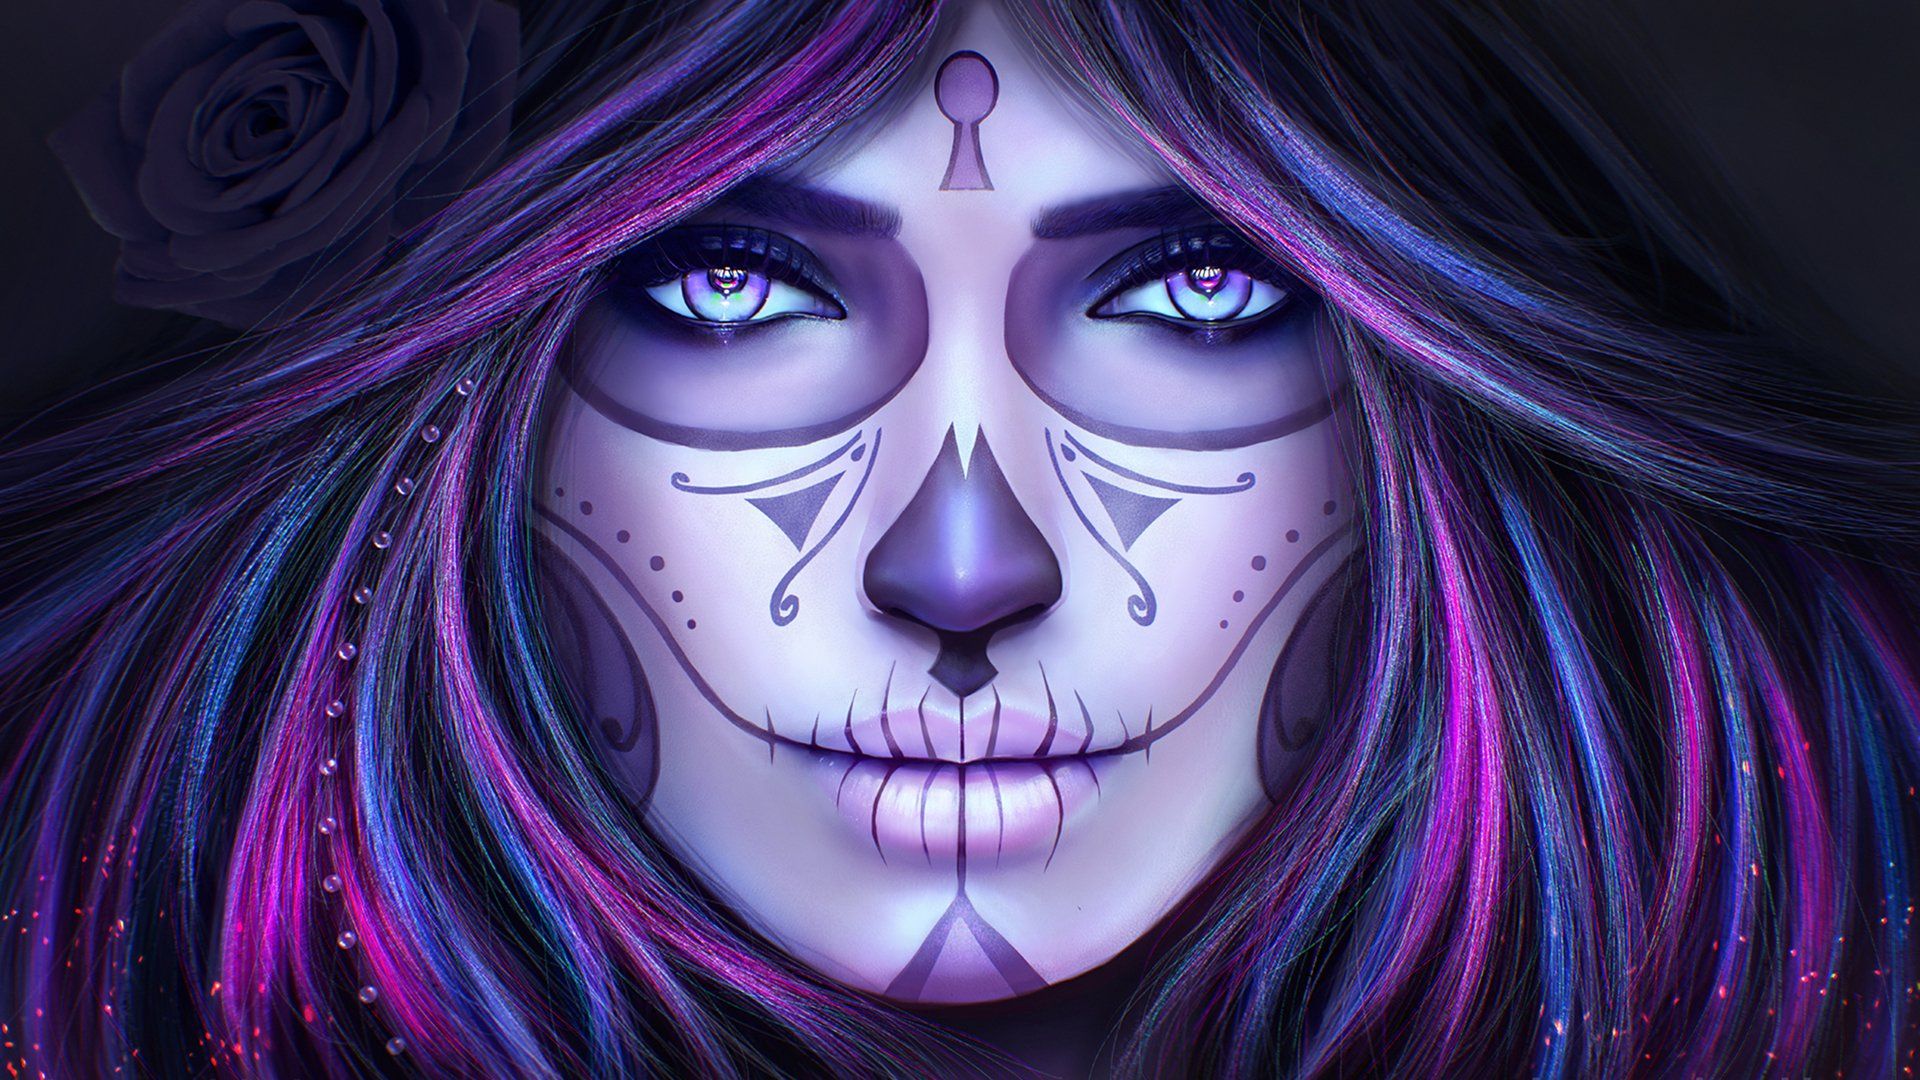 Woman day of the dead face paint wallpaper Best 37 day of the dead wallpaper on hipwallpaper holiday